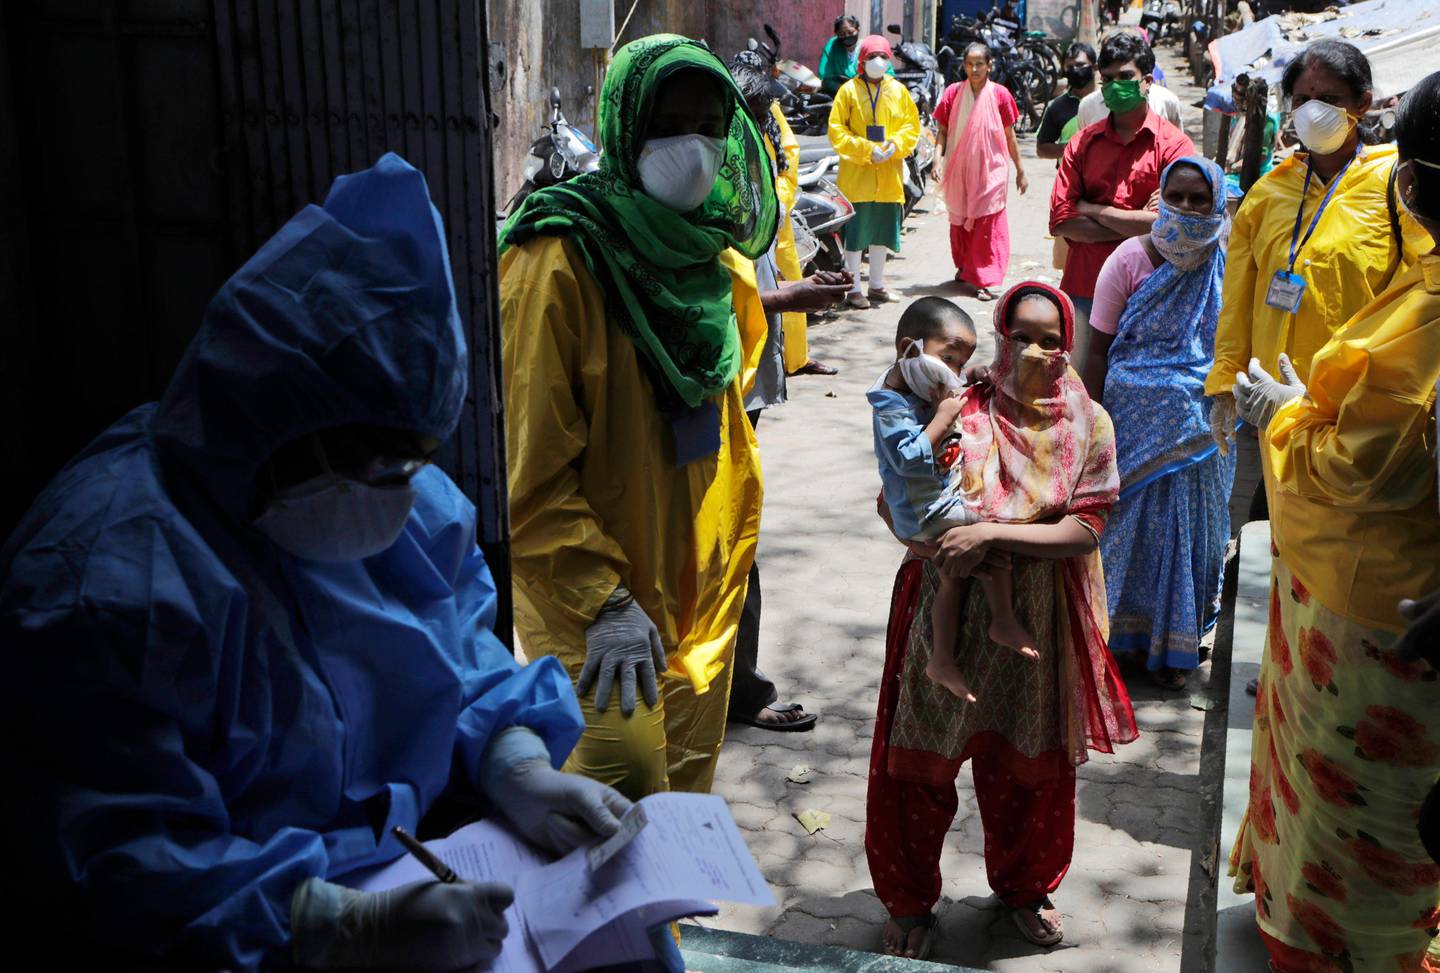 People wait to give their samples to medical staff at a slum area during lockdown to control the spread of the new coronavirus in Mumbai, India, Tuesday, April 7, 2020. The new coronavirus causes mild or moderate symptoms for most people, but for some, especially older adults and people with existing health problems, it can cause more severe illness or death. (AP Photo/Rajanish Kakade)